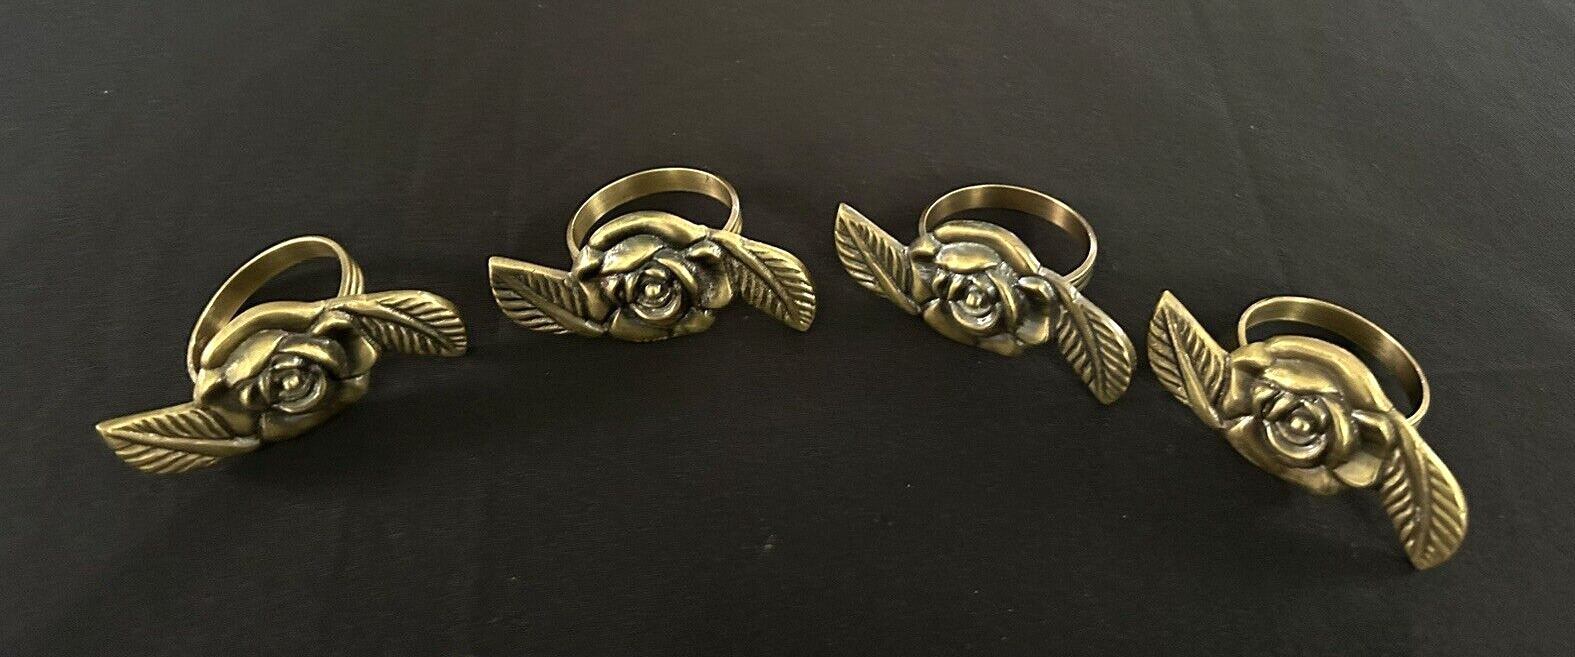 Lot of 4 Gold Tone Rose metal Napkin Ring Holders - new